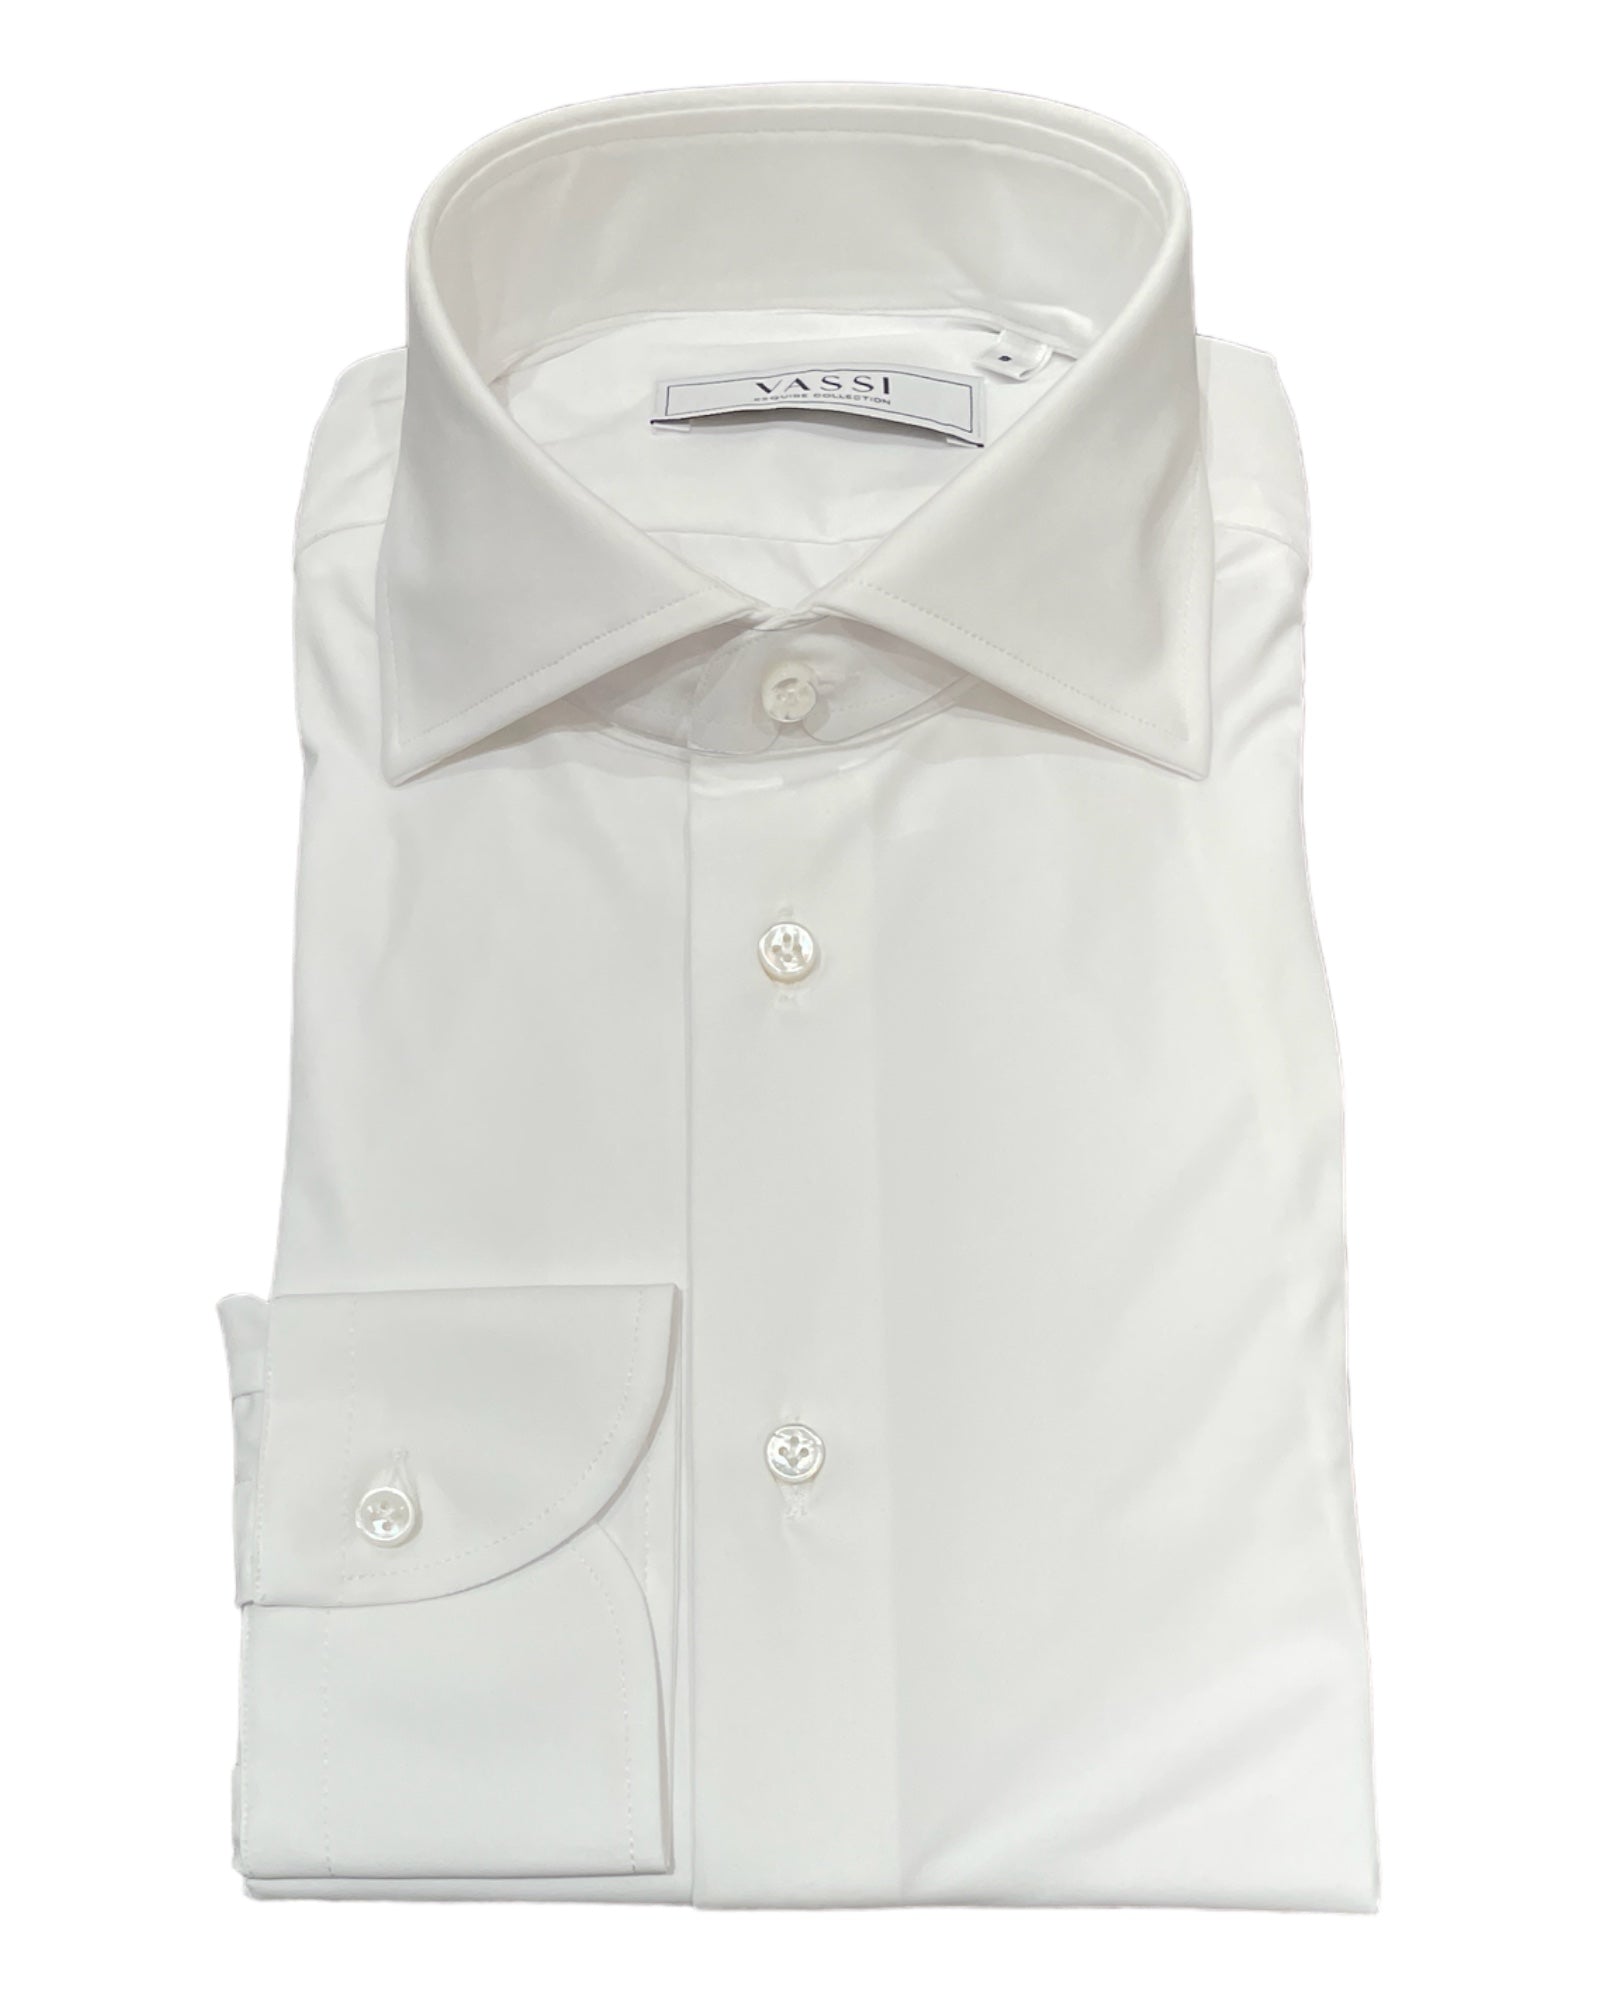 Performance Stretch Sport Shirt-Solid White